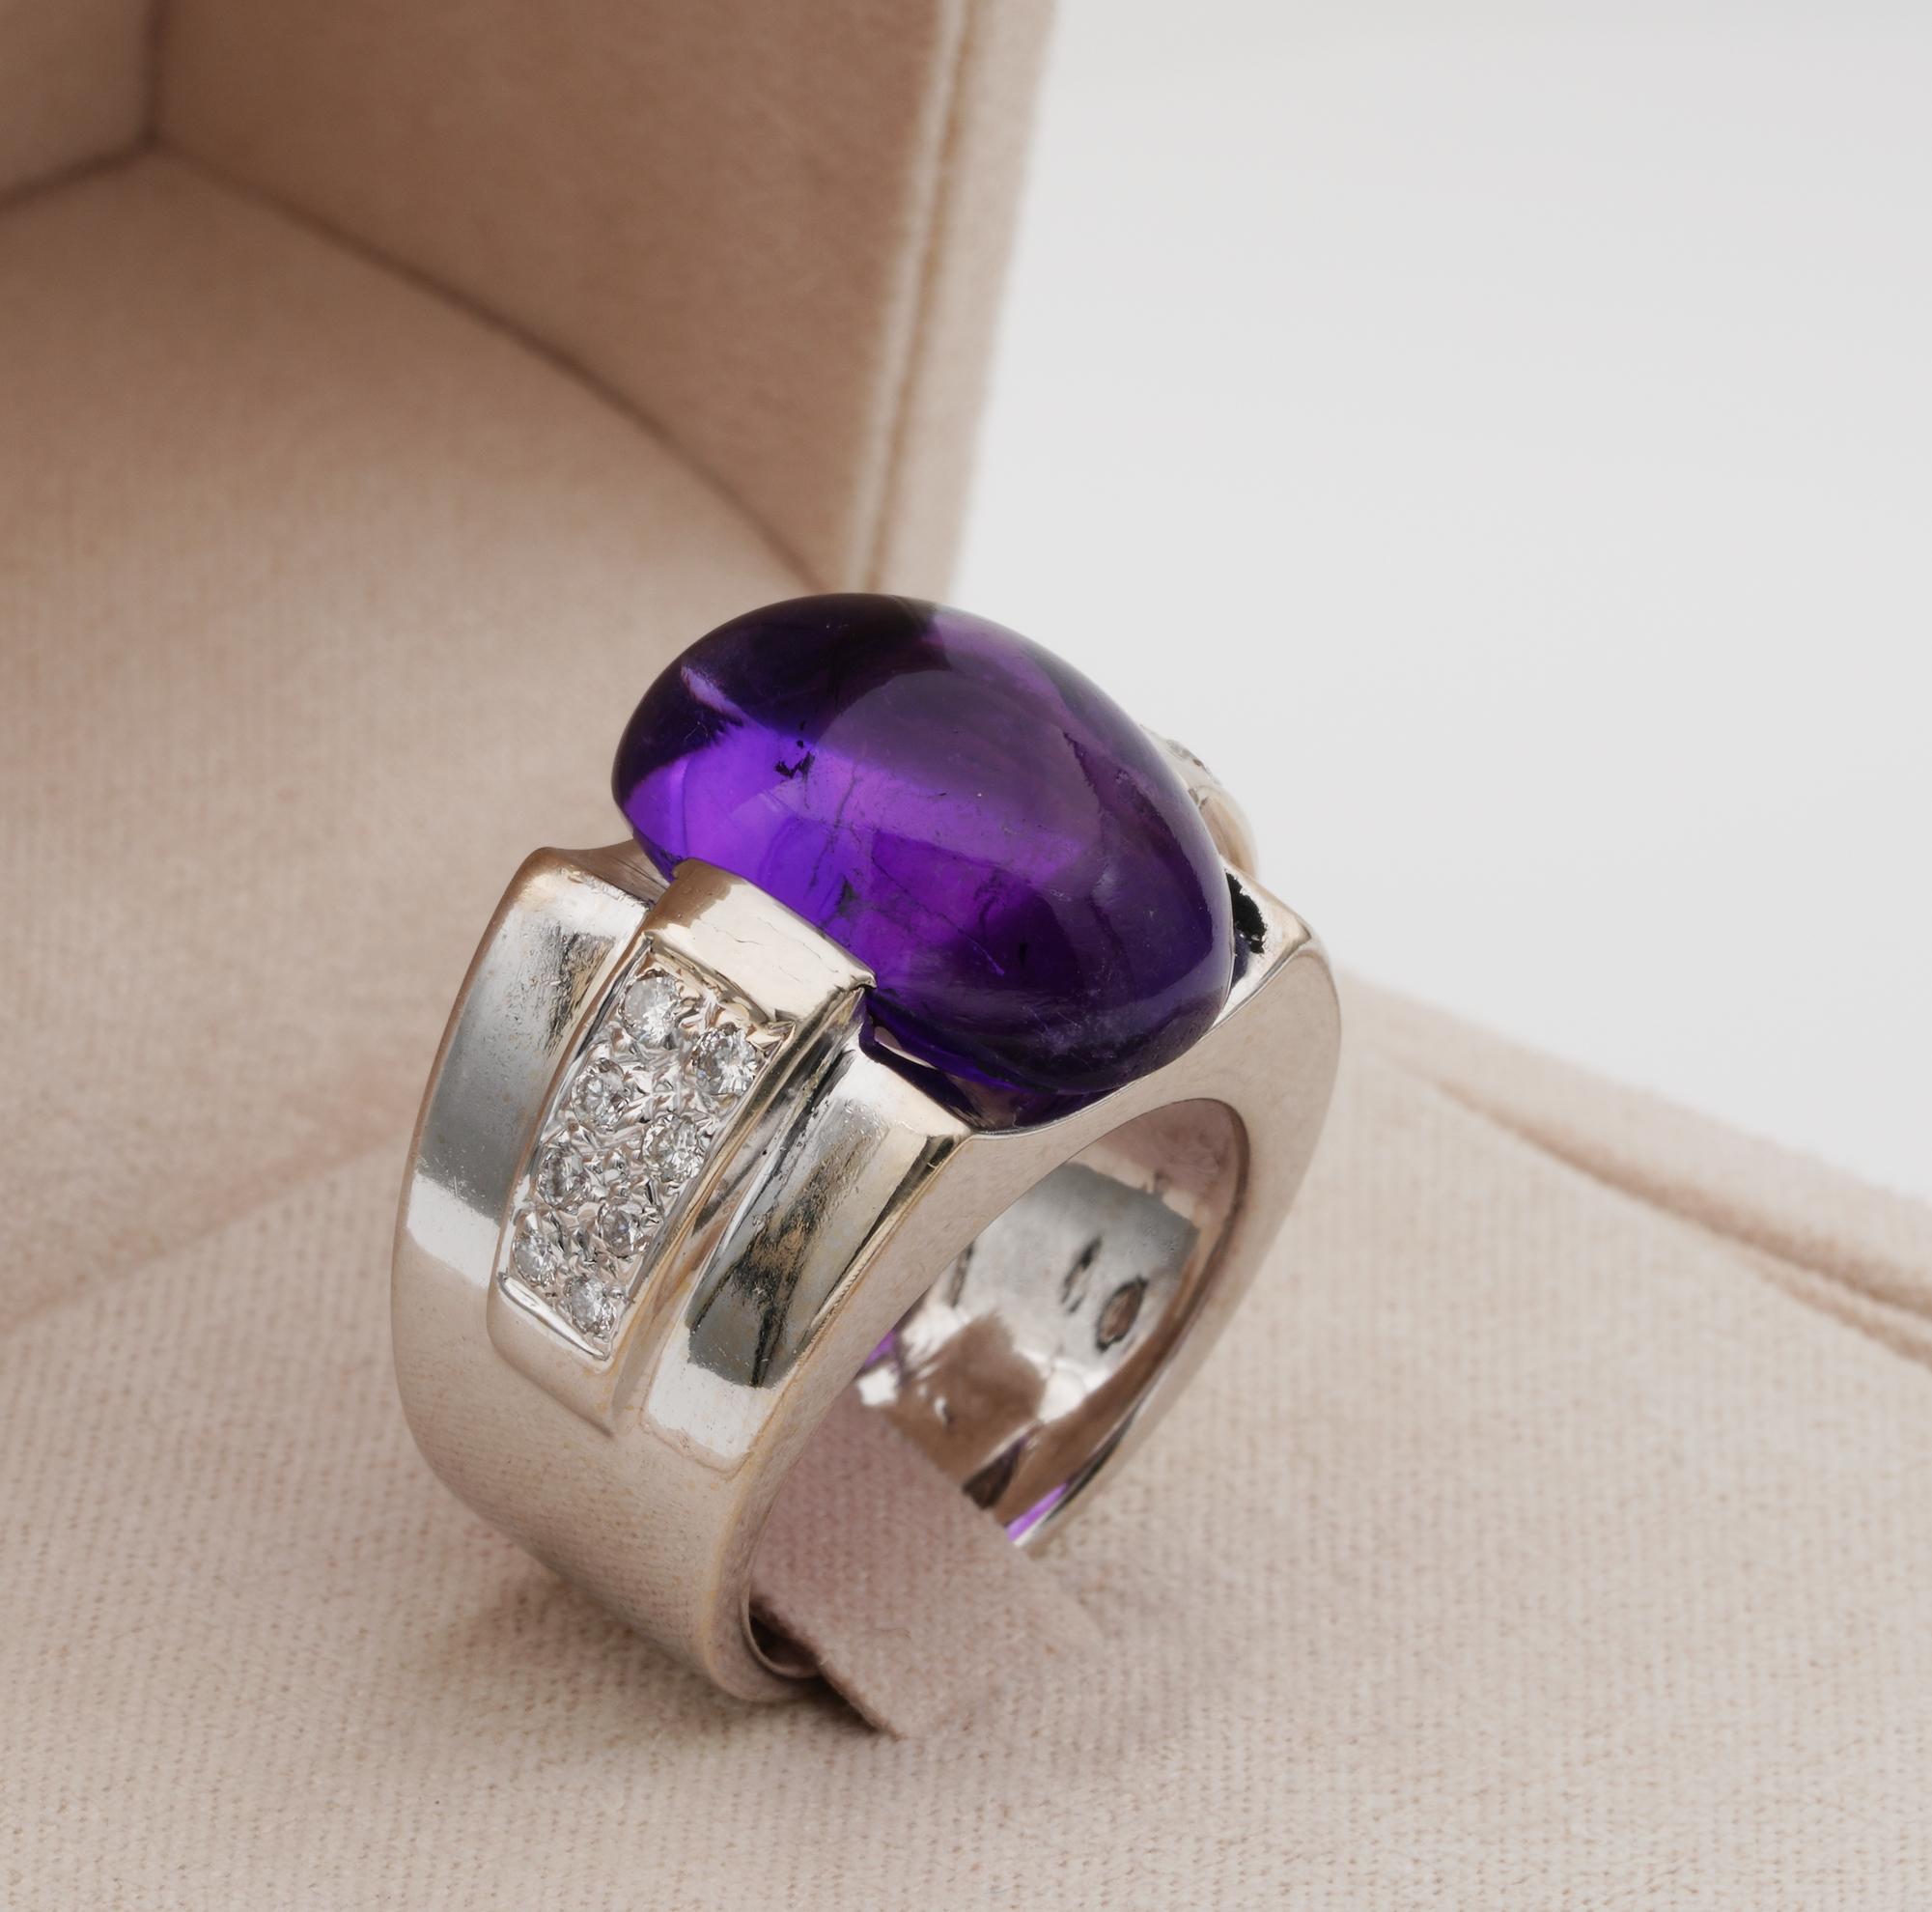 Bold design fabulous Art Deco ring, 18 KT white gold
1930 ca
Hand crafted of solid 18 KT white gold – tested
Centrally set with a large 10.00 Ct. Natural untreated Amethyst cabochon of gorgeous Purple colour
Complemented by line of 16 transitional